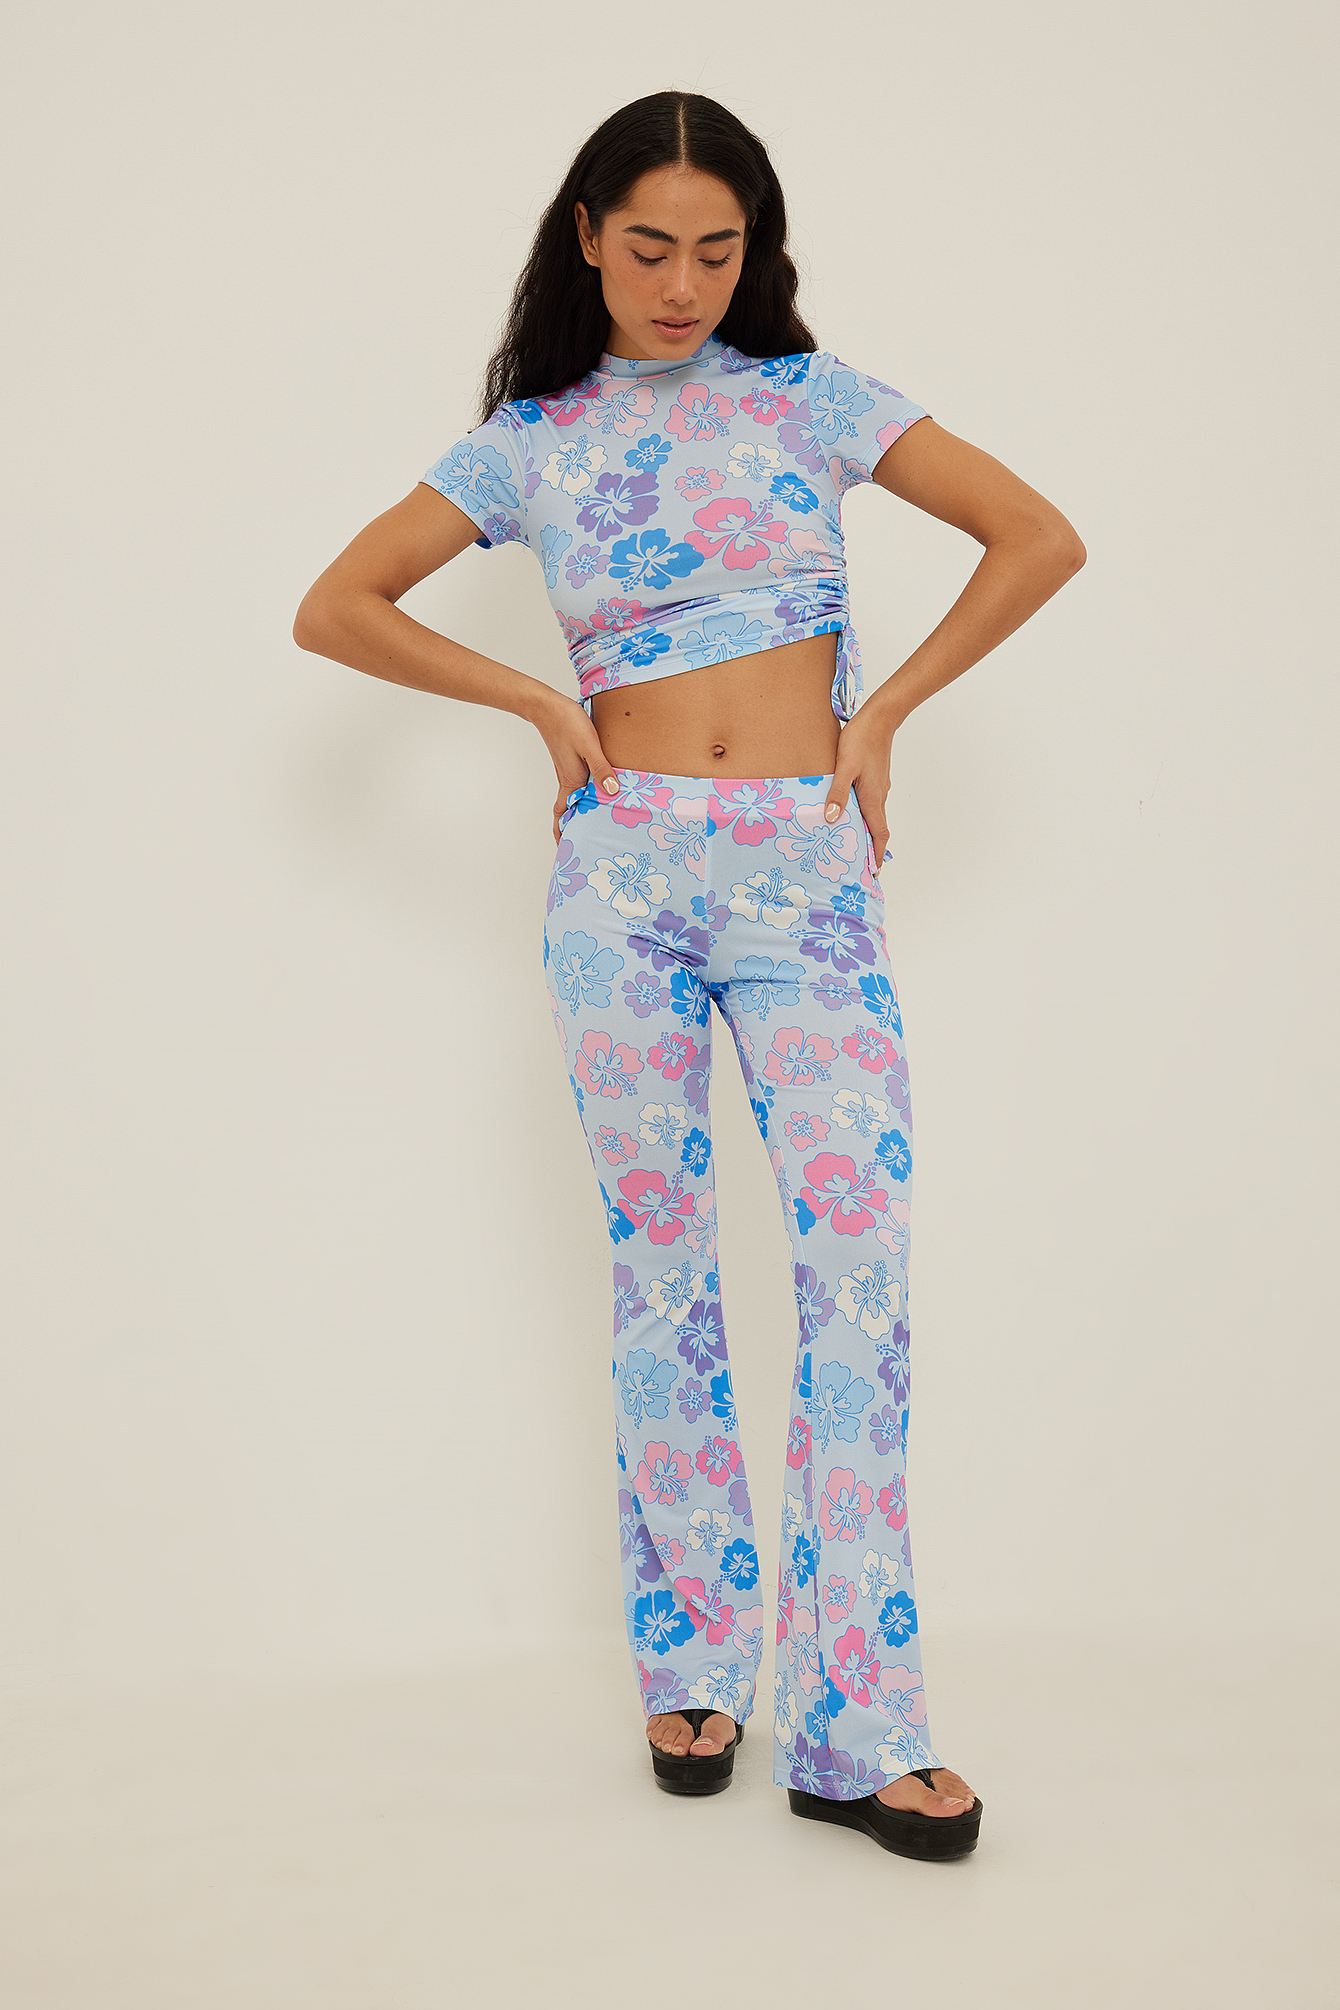 Printed Pants Outfit